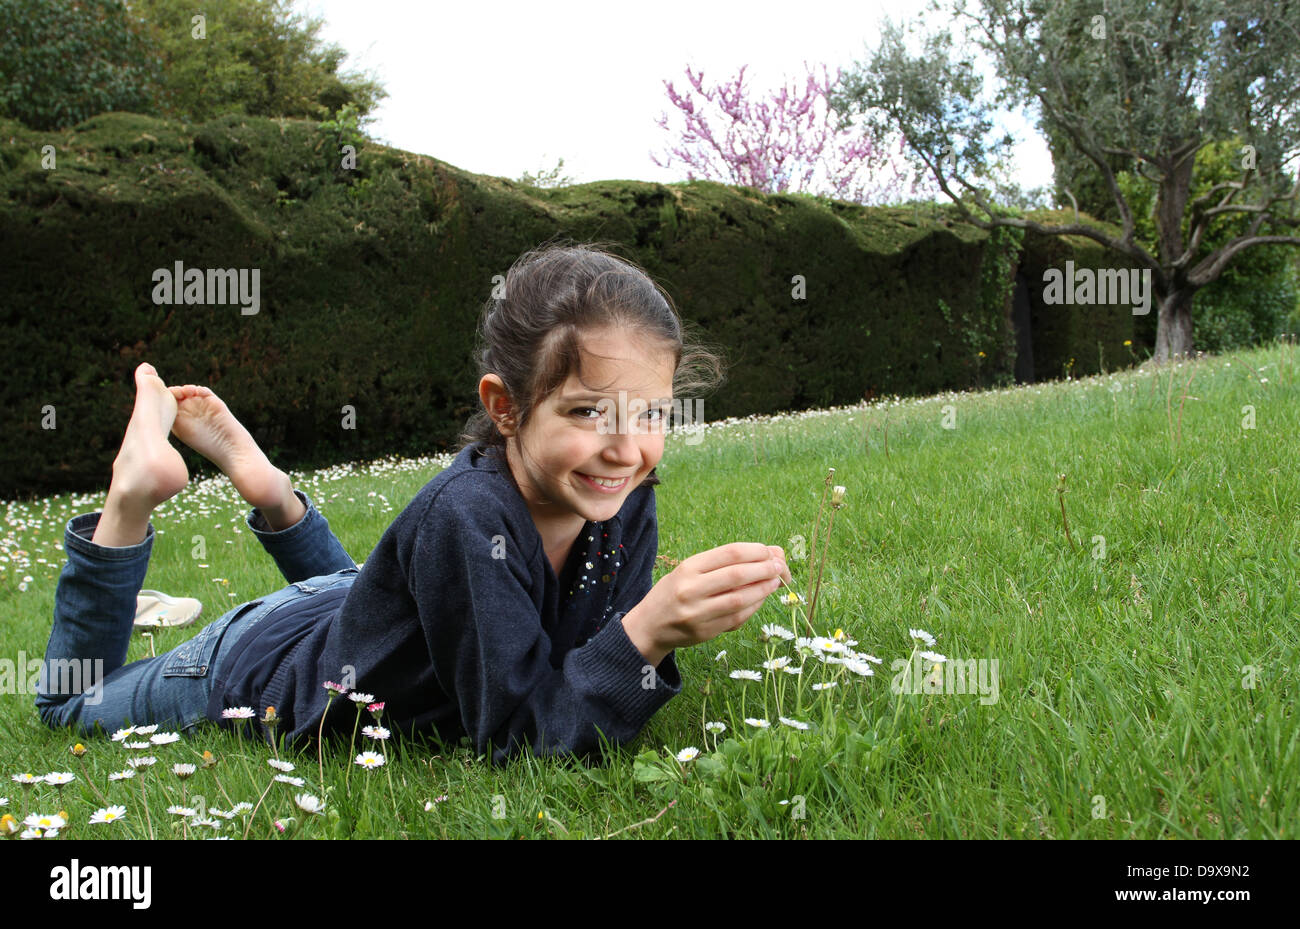 Young girl posing in a garden lying on the lawn Stock Photo